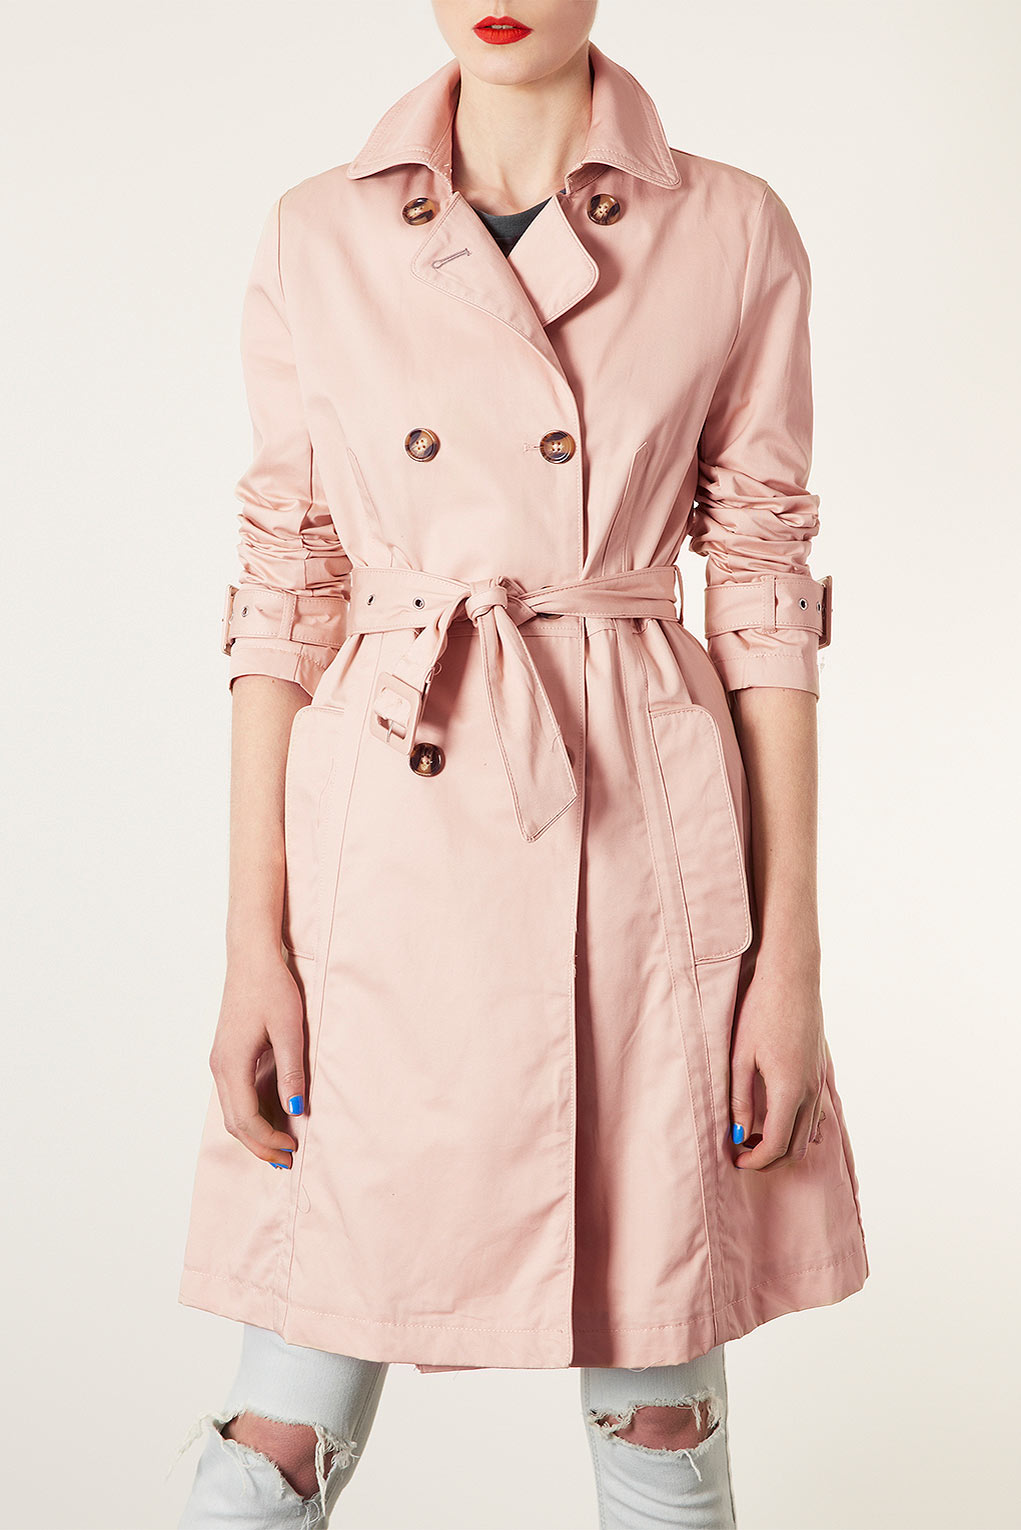 TOPSHOP Unlined Seamed Trench Coat in Pale Pink (Pink) - Lyst